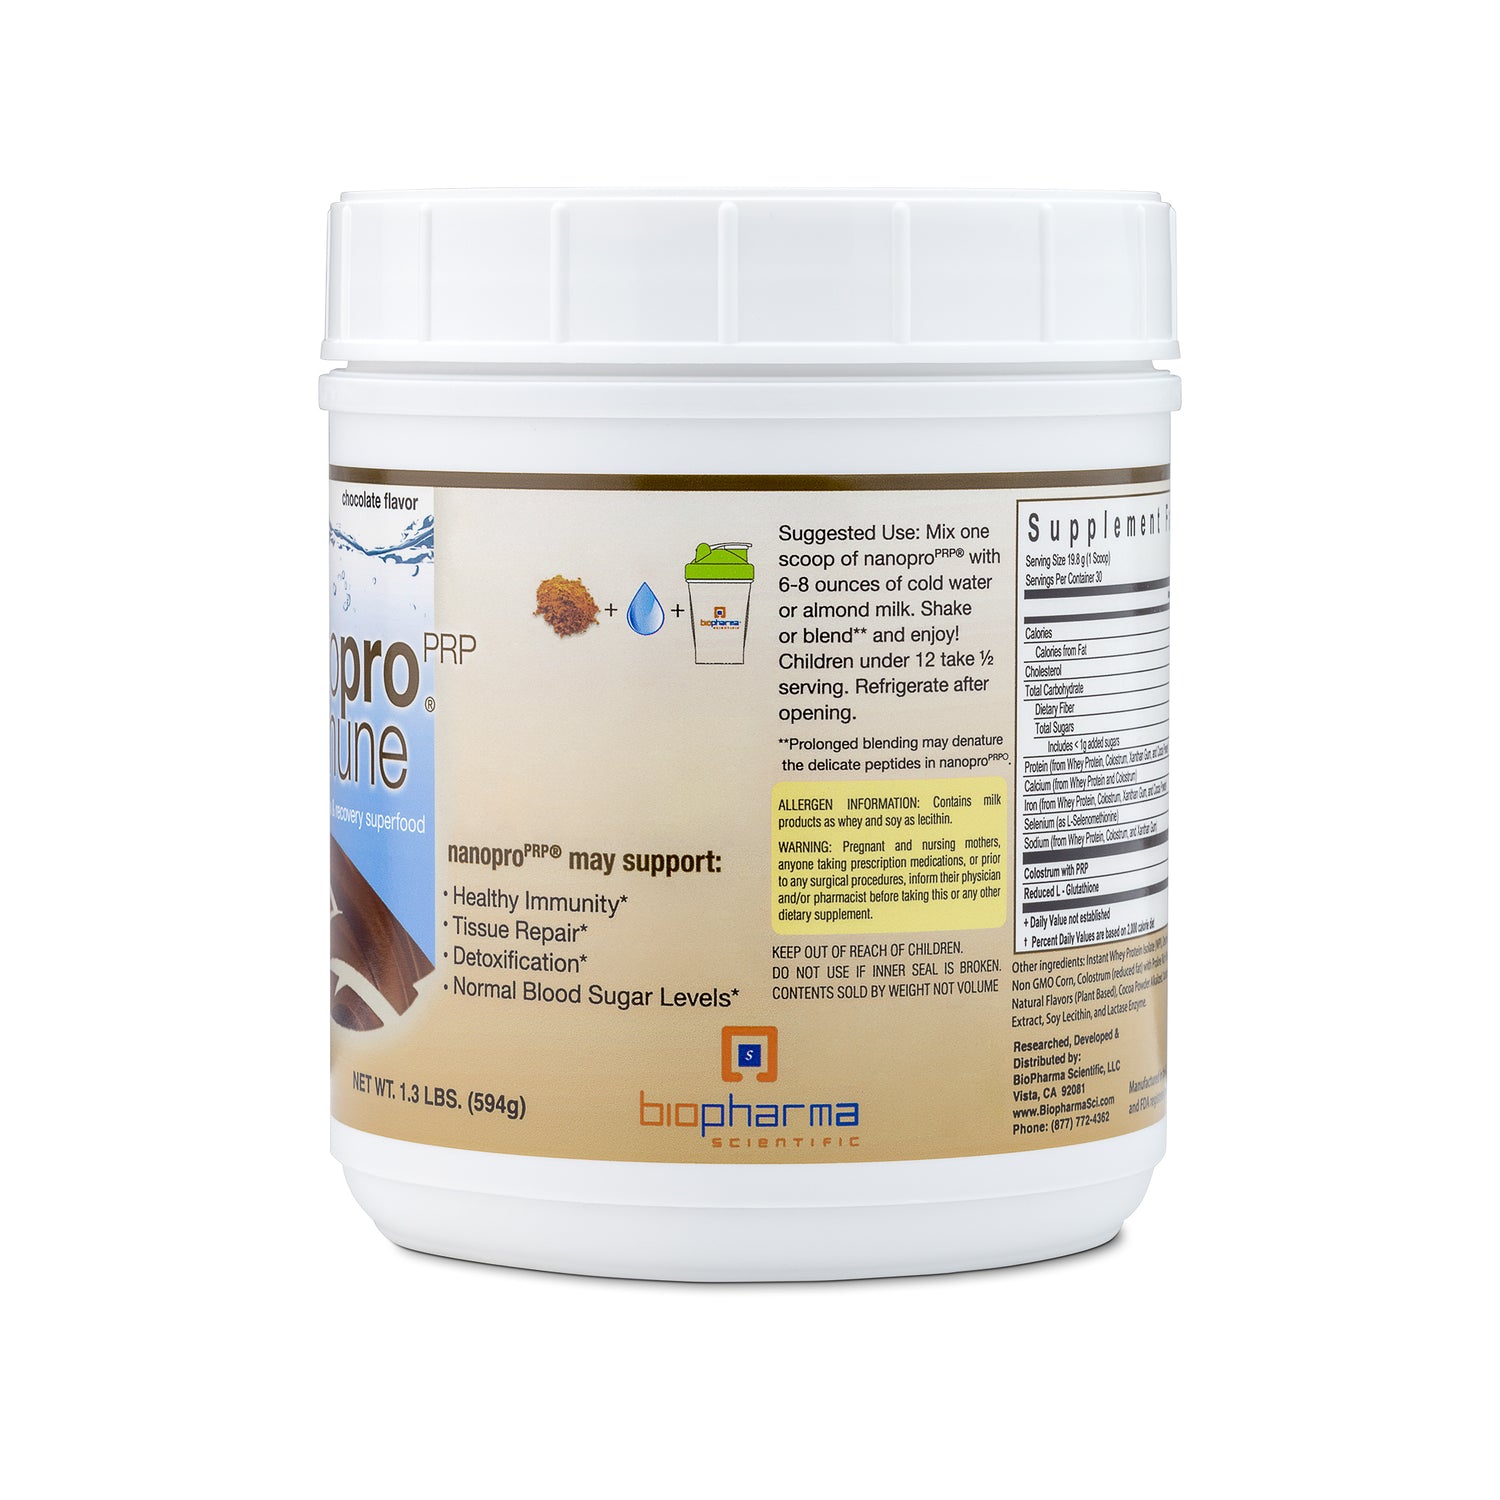 nanopro immune chocolate protein powder supplement with detox and recovery superfood - side with additional information